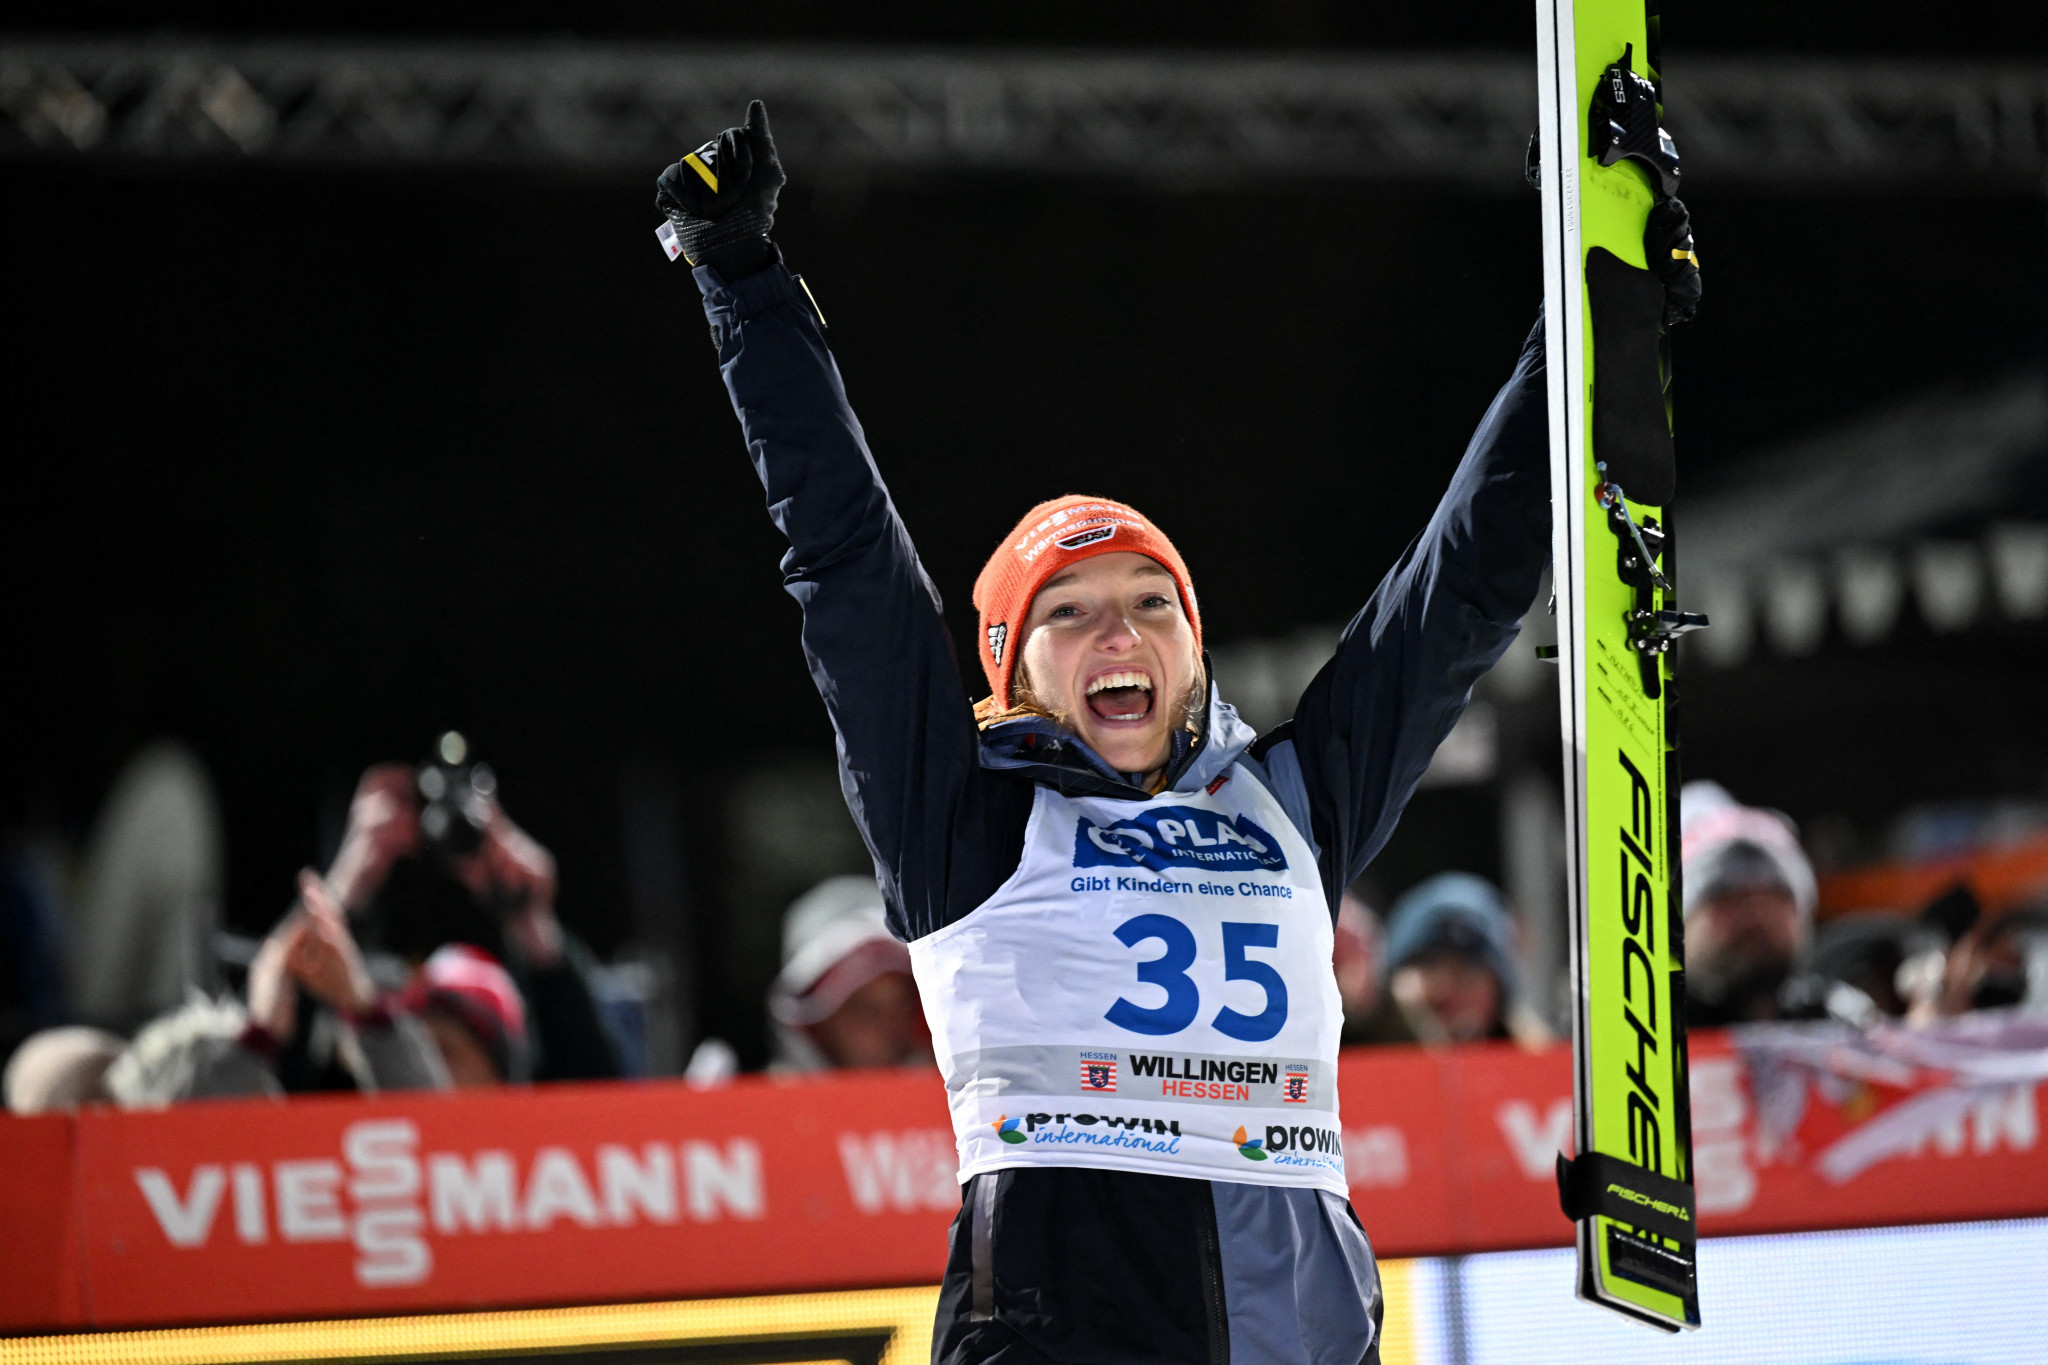 Germany's Katharina Althaus claimed a home victory in the women's large hill event in Willingen ©Getty Images